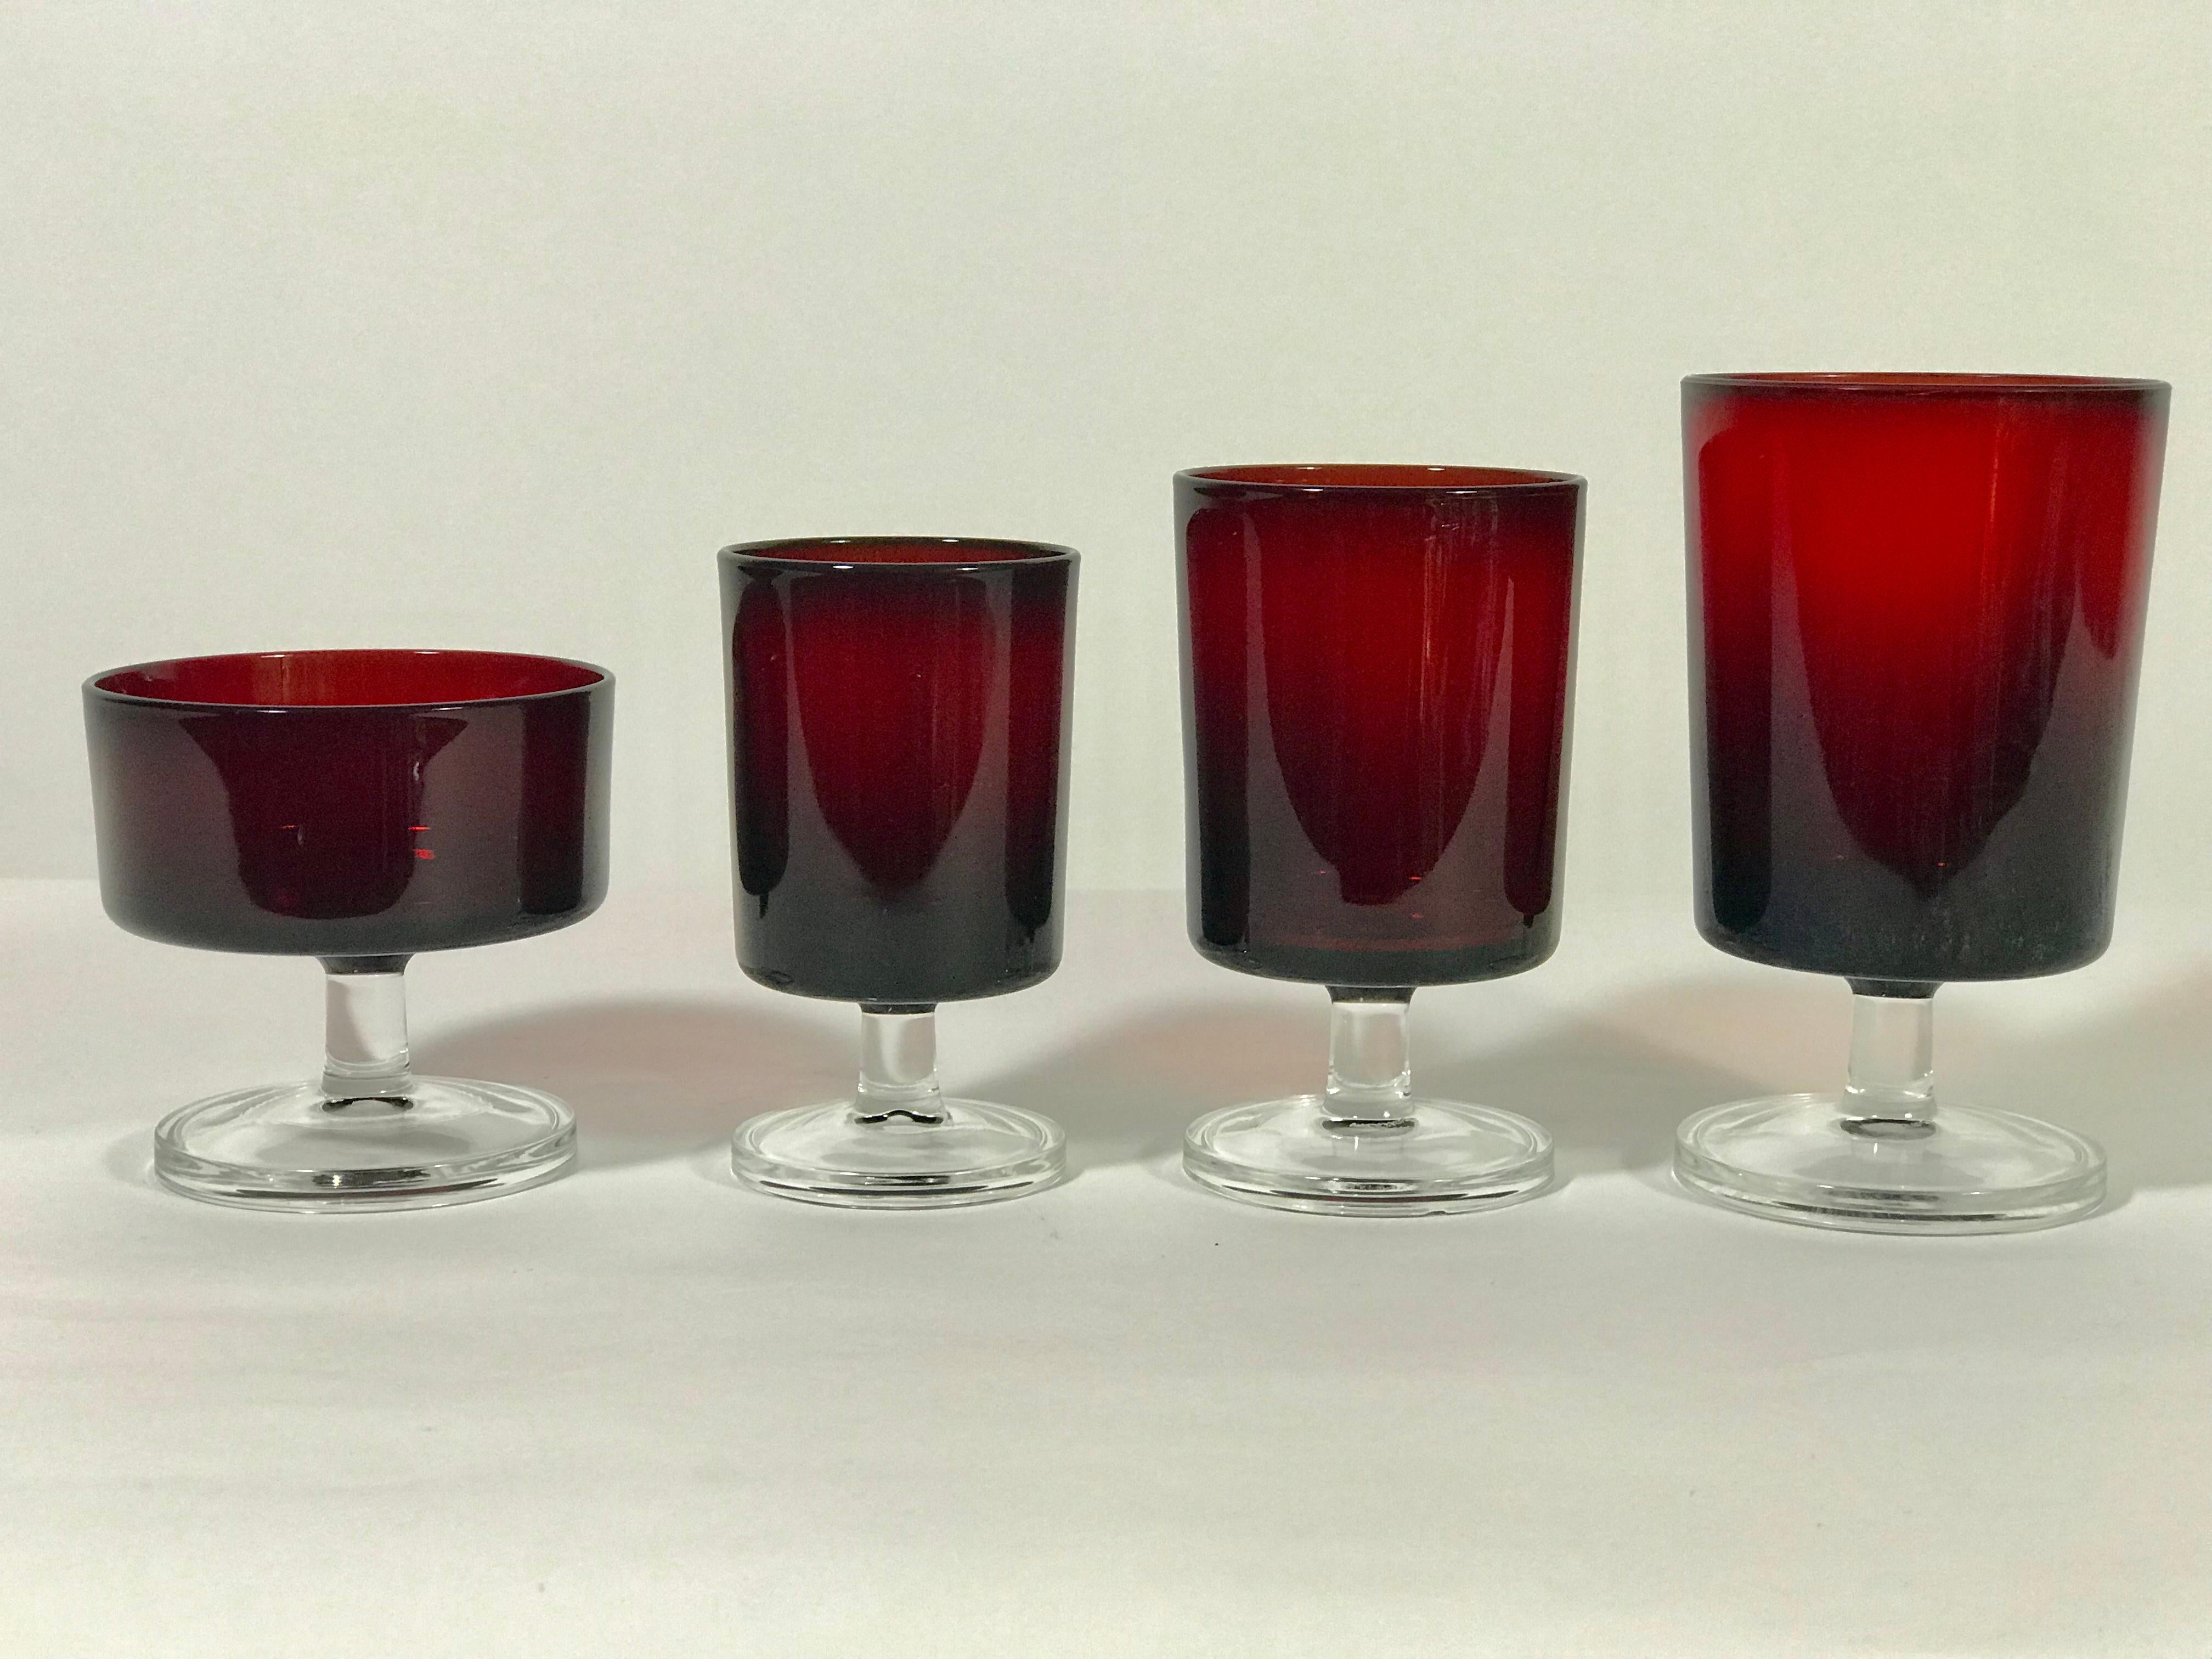 Midcentury 32 piece Luminarc French ruby red glassware/ stemware.. Gorgeous ruby red color with clear stems. Some still retain original Luminarc marking stickers. Elegant minimal design. A lovely addition to any table setting. All pieces marked